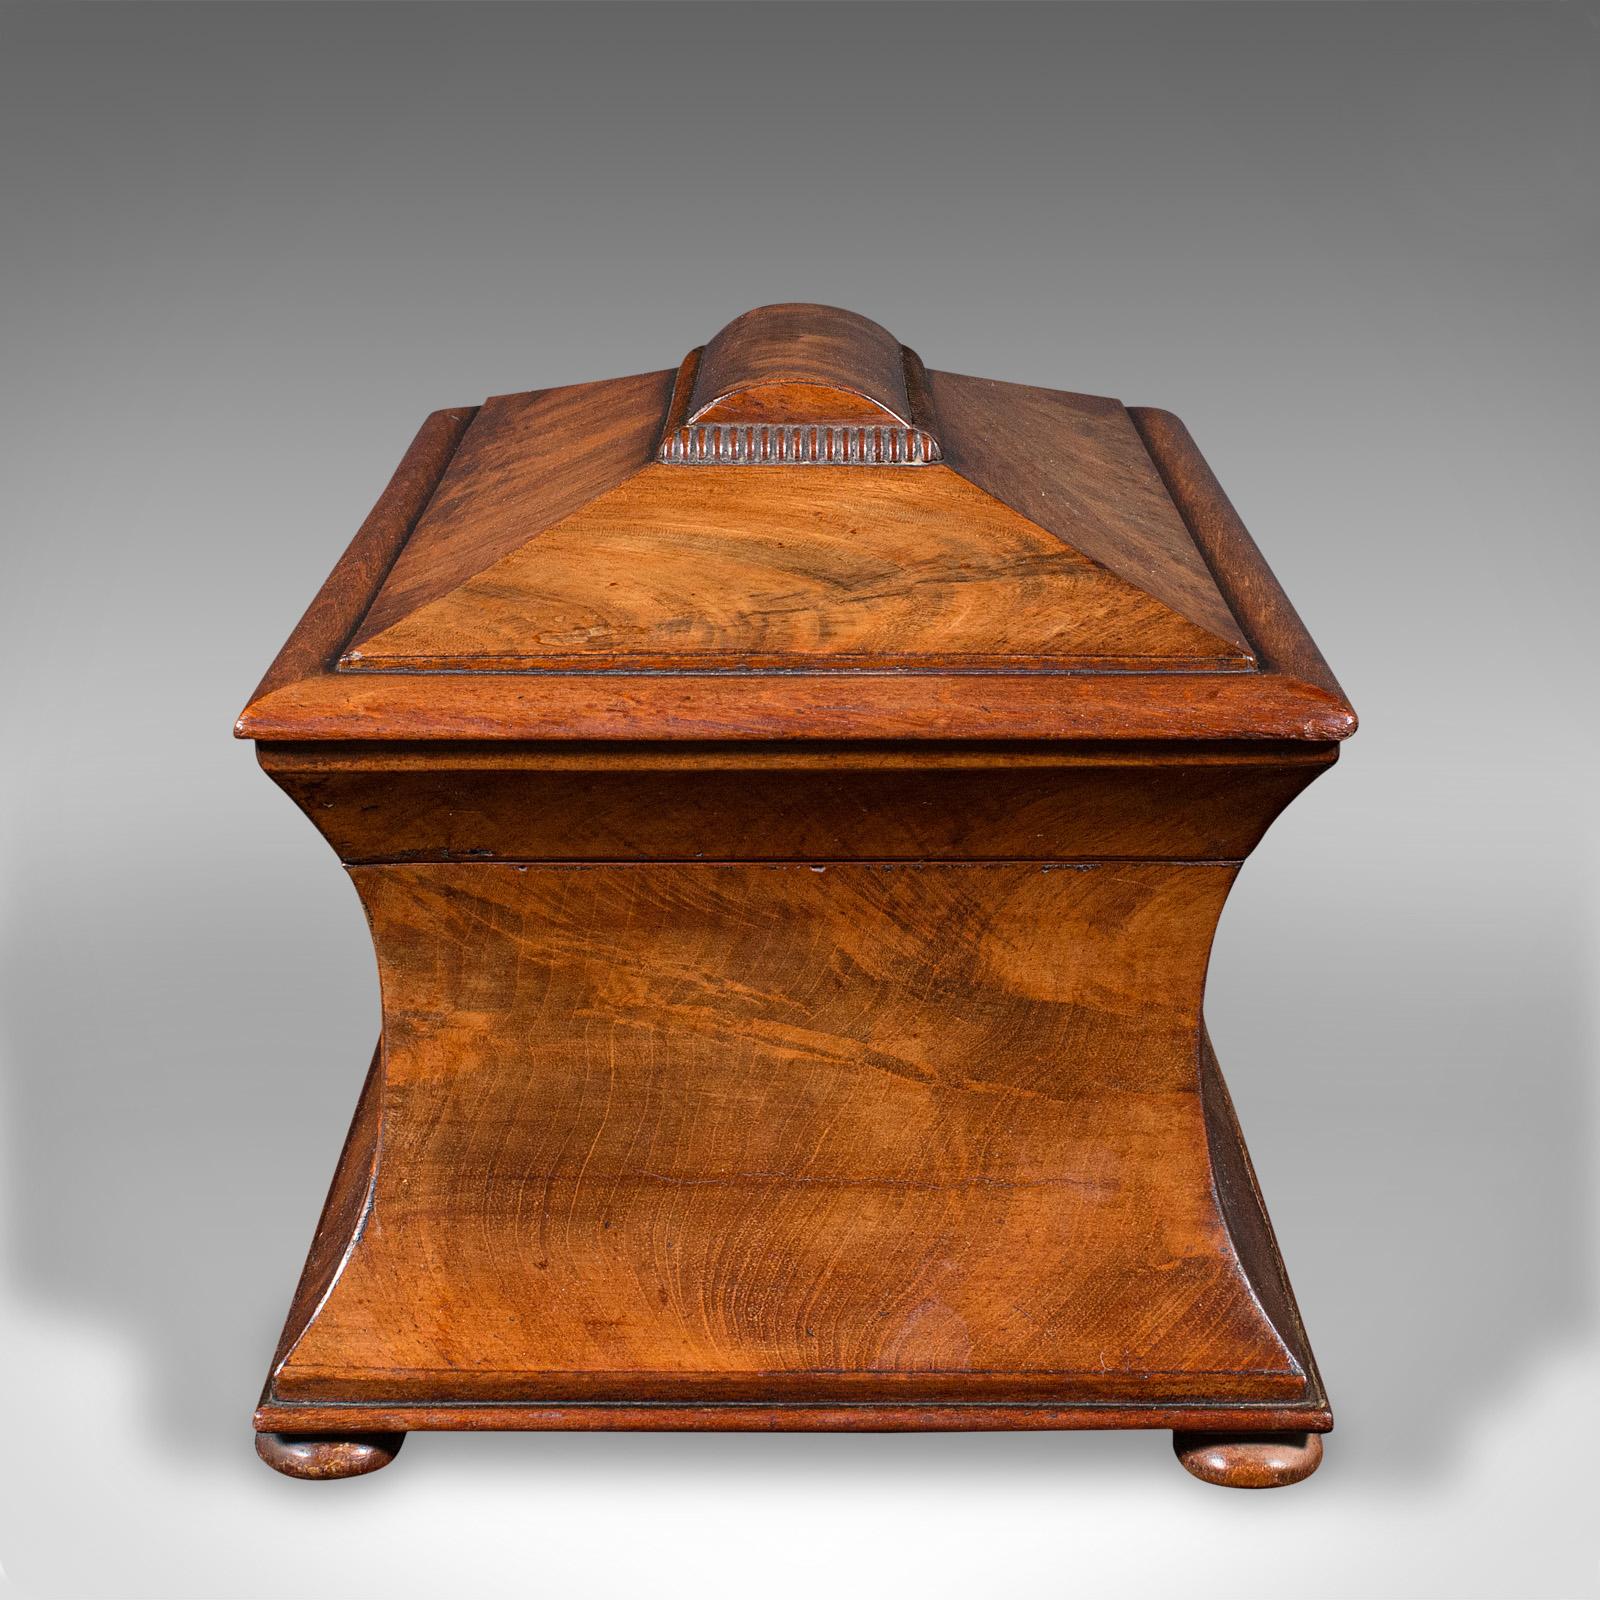 Antique Drawing Room Tea Caddy, English, Flame, Sarcophagus, Regency, circa 1820 In Good Condition For Sale In Hele, Devon, GB